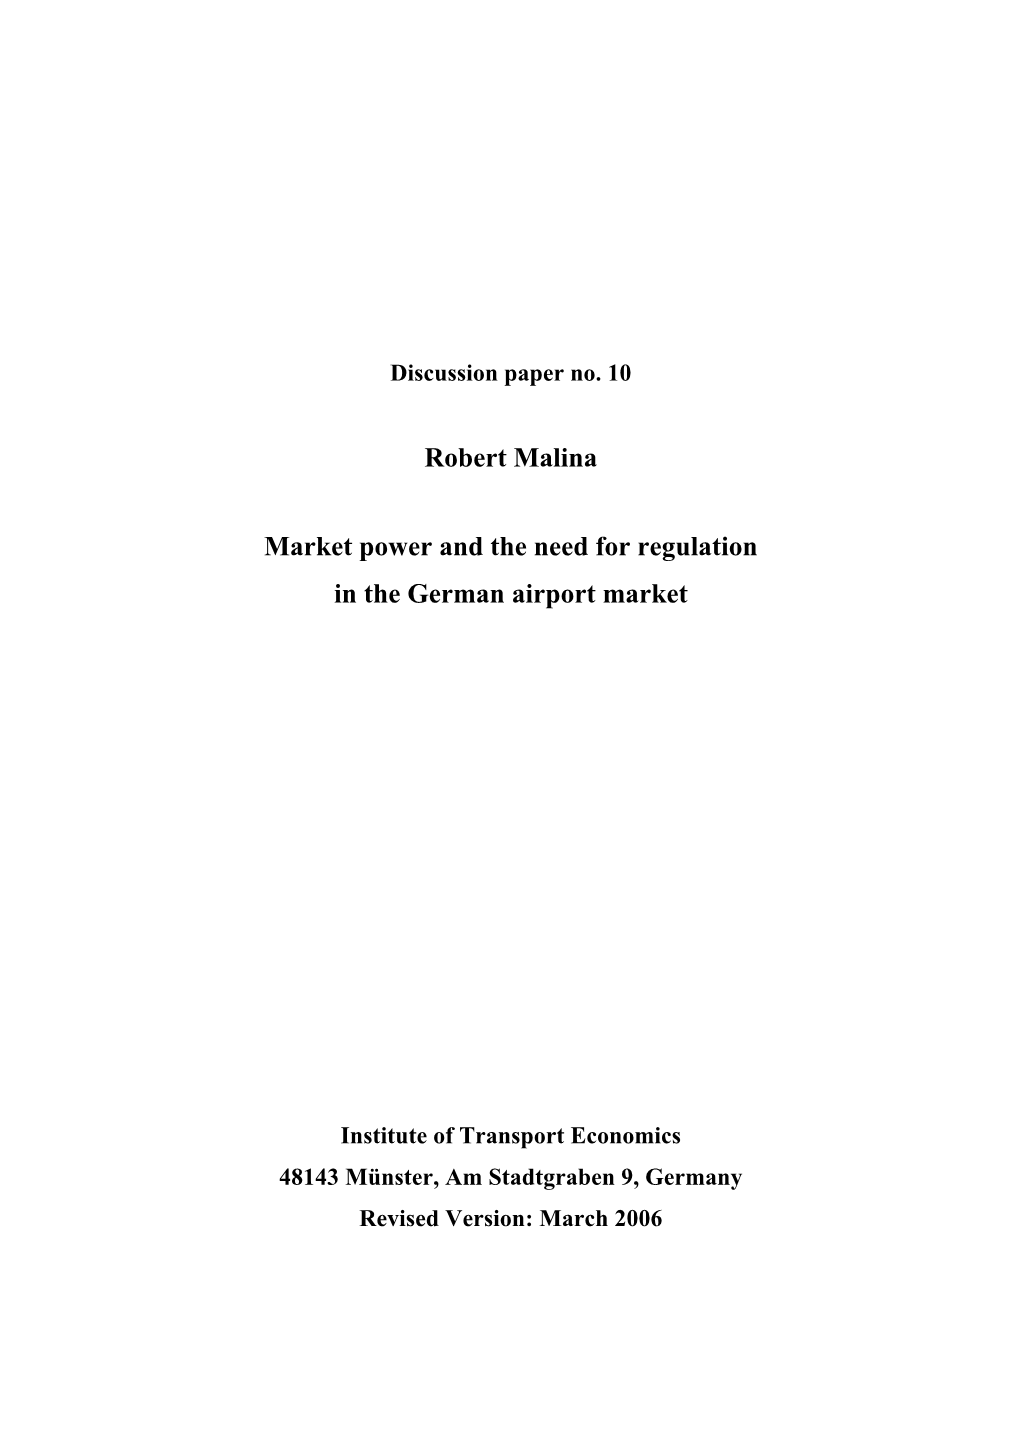 Robert Malina Market Power and the Need for Regulation in the German